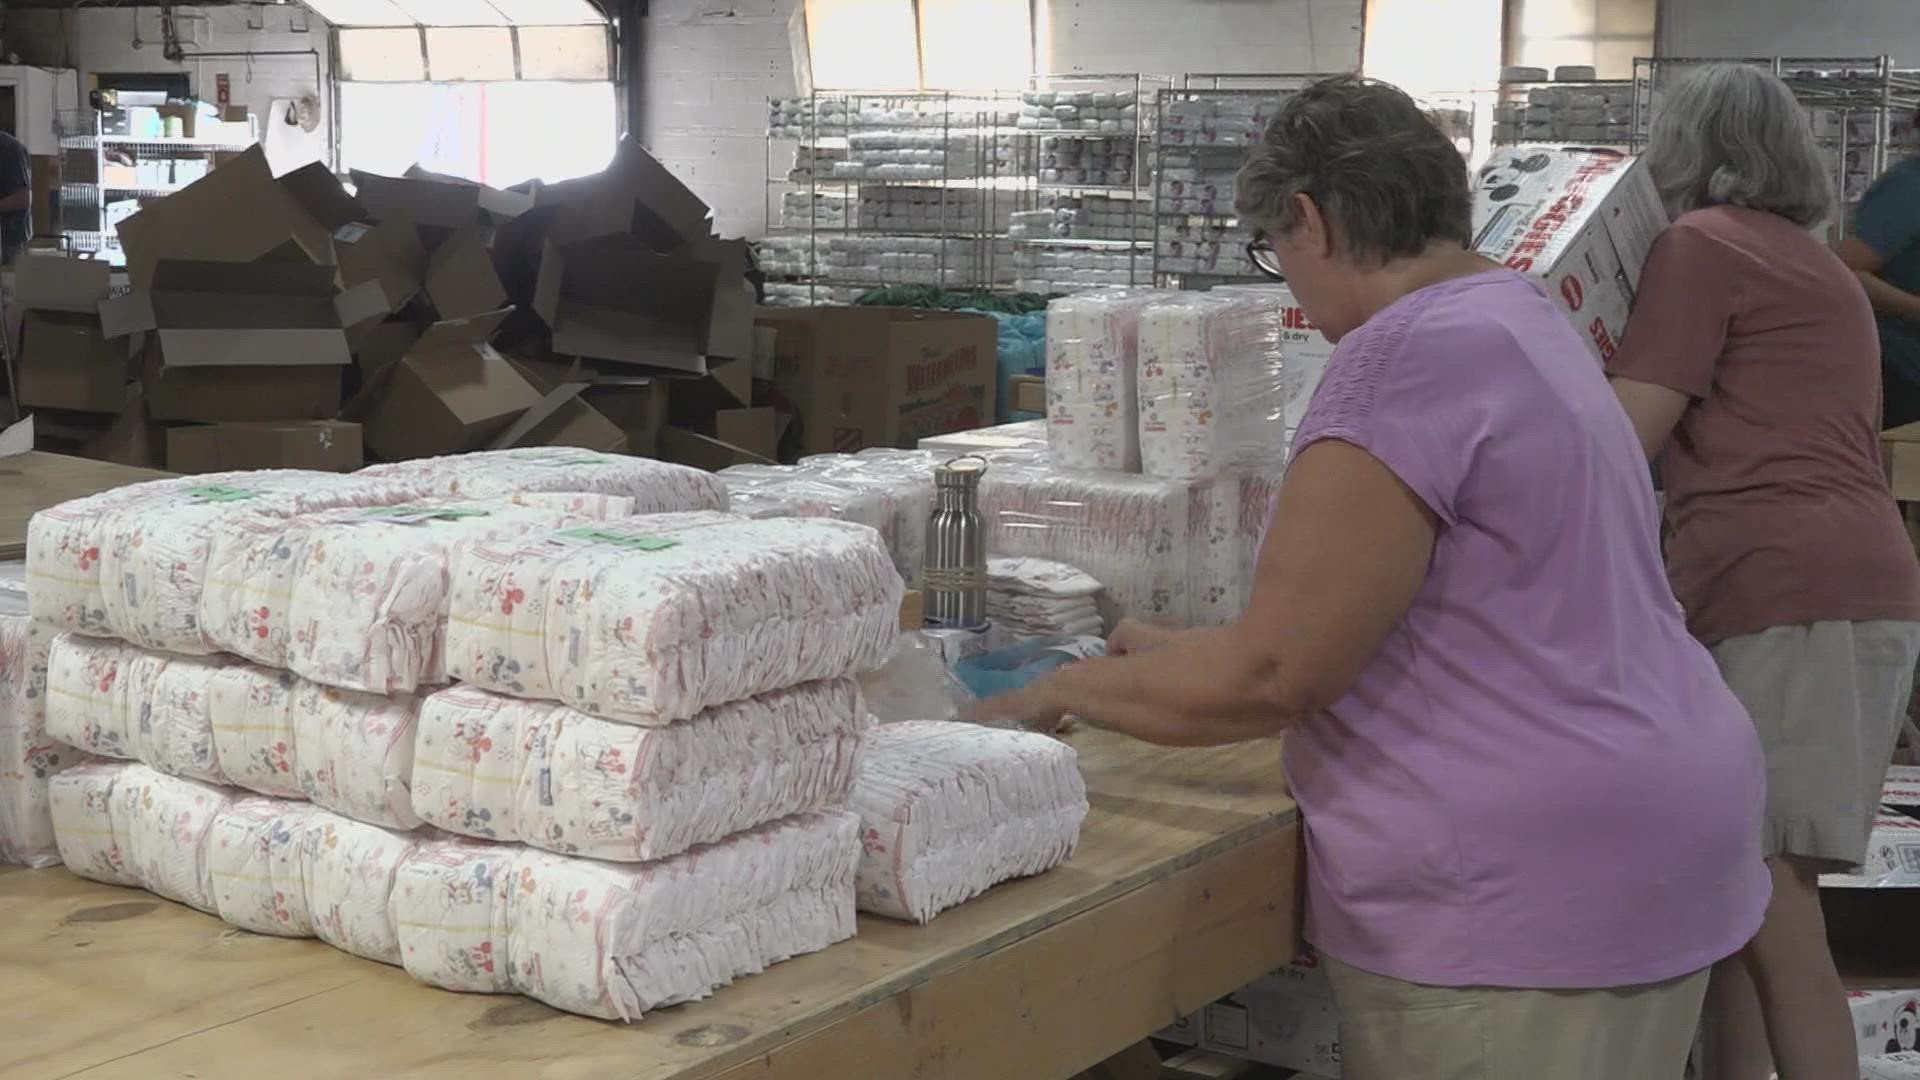 In St. Louis, more county libraries are being utilized to distribute diapers for those in need.